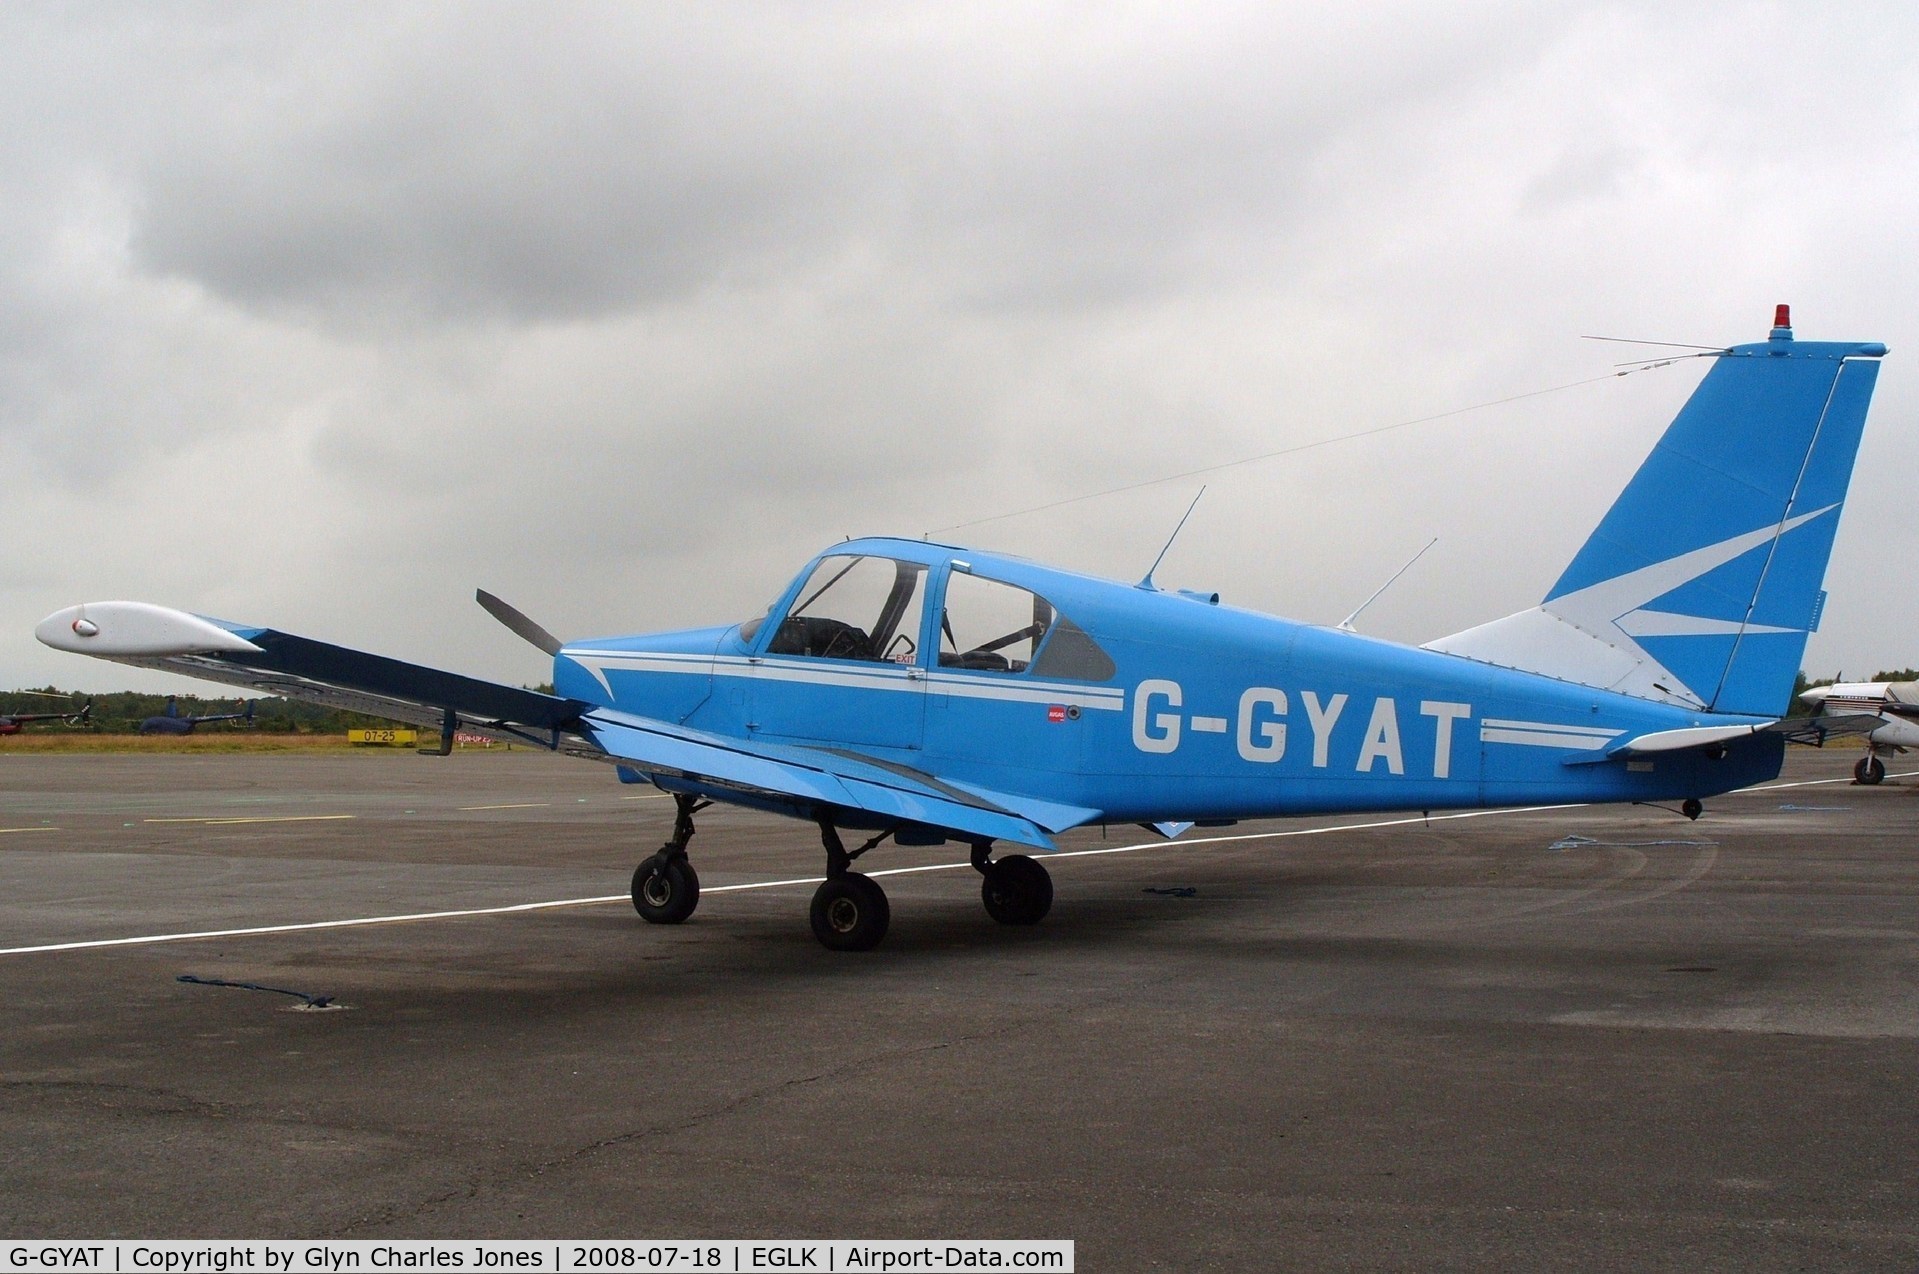 G-GYAT, 1966 Gardan GY-80-180 Horizon C/N 136, Previously D-EAZZ. Owned by Rochester GYAT Flying Group.